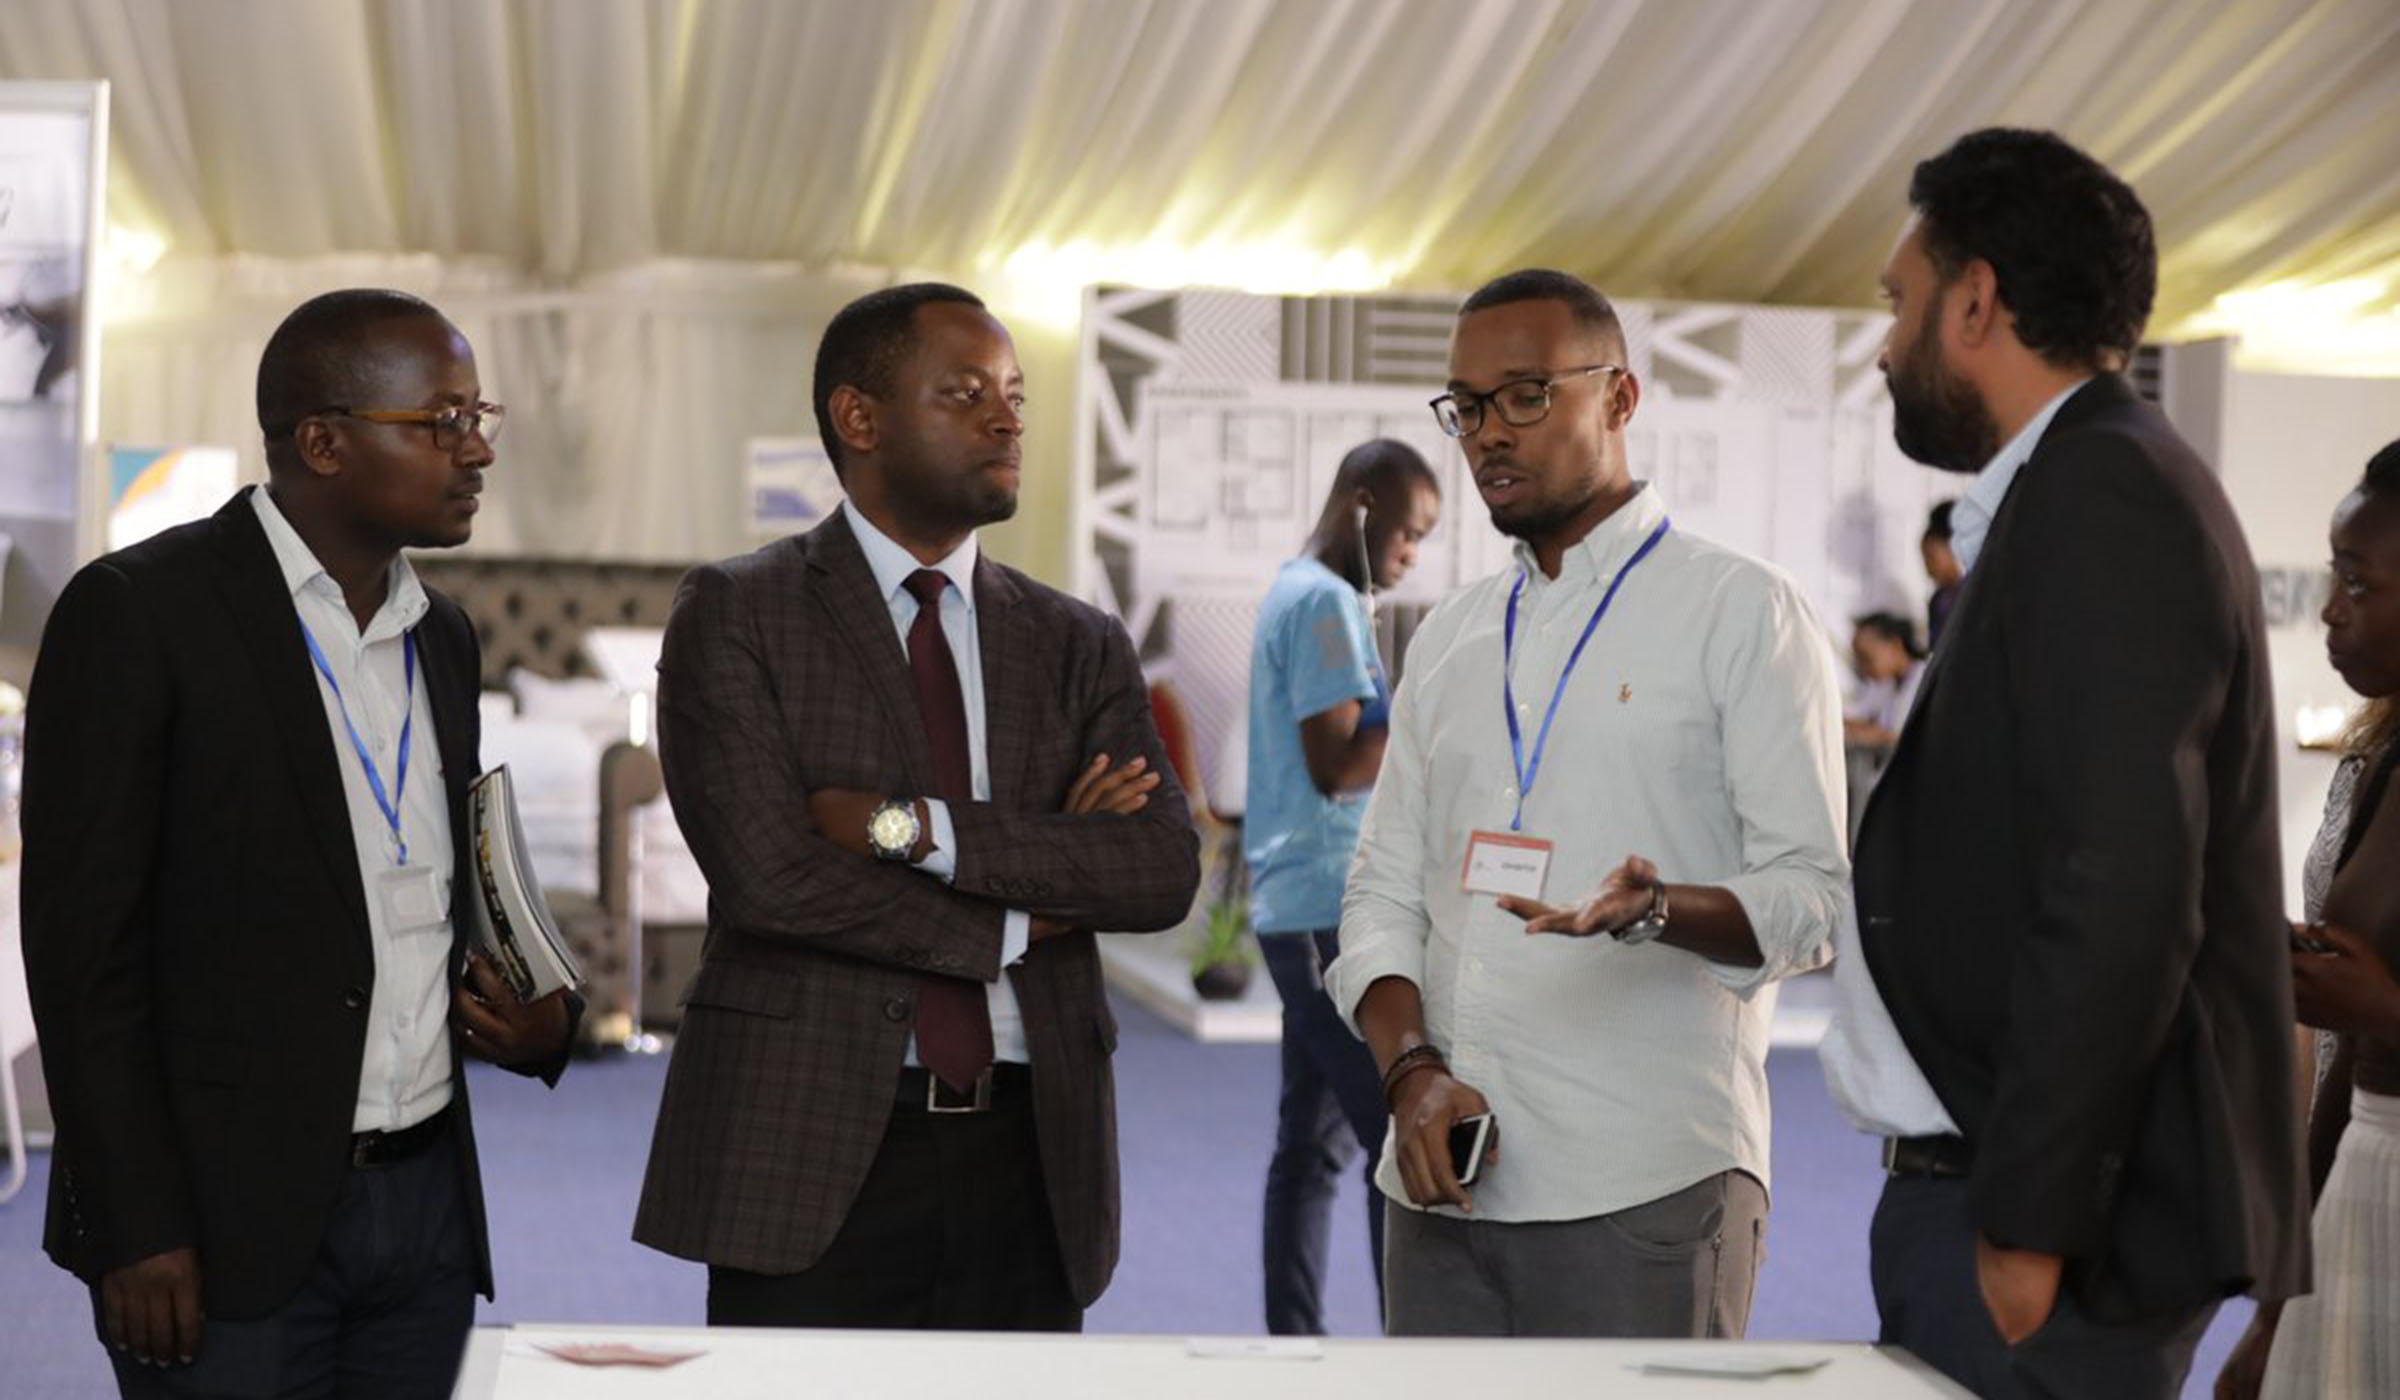 An exhibitor (c) showing the products to the officials during the expo. Courtesy.